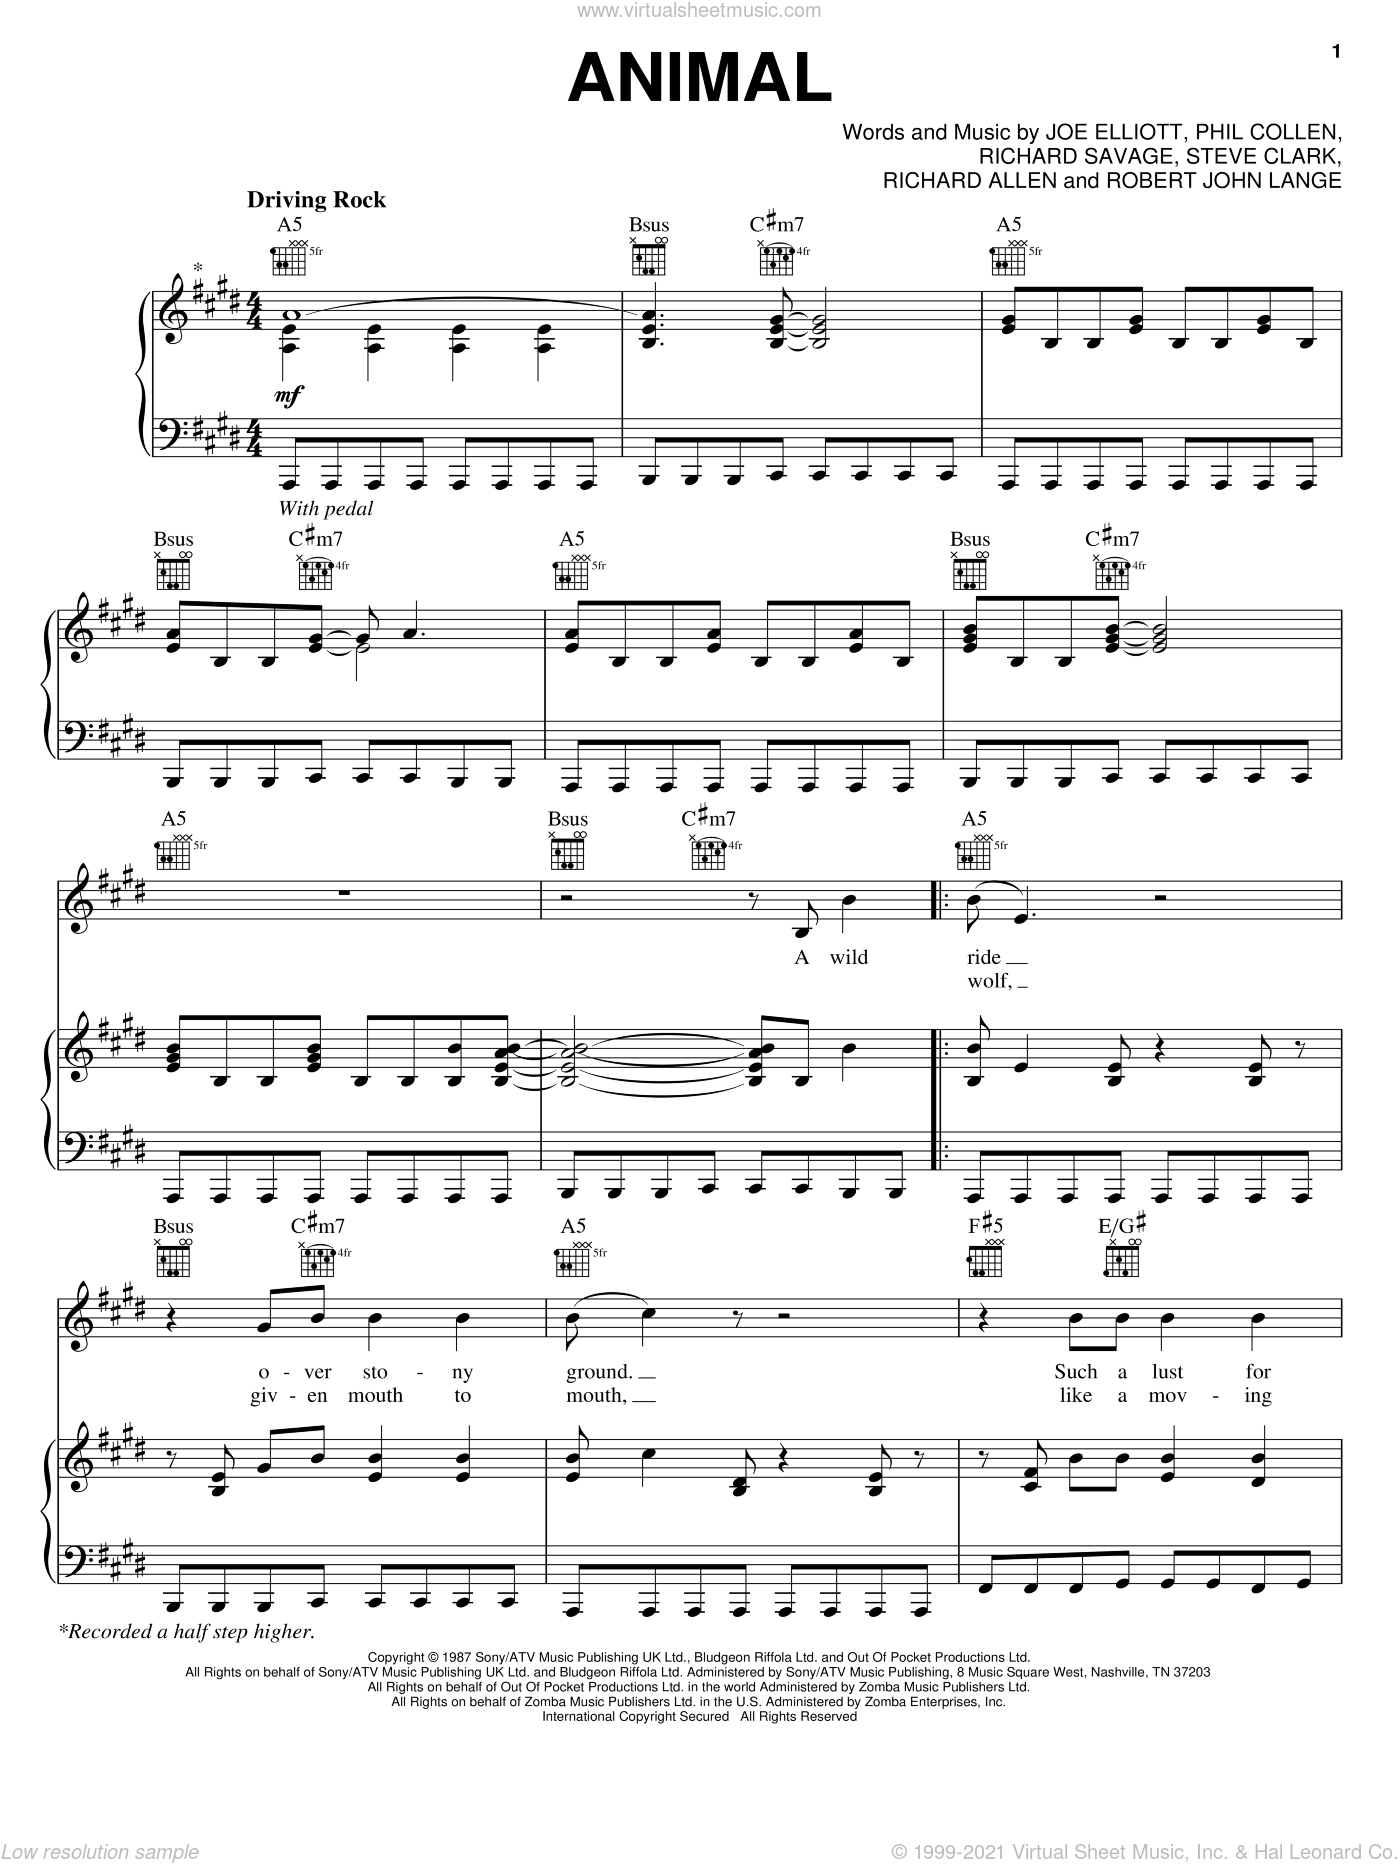 Def Leppard: Animal sheet music for voice, piano or guitar (PDF)